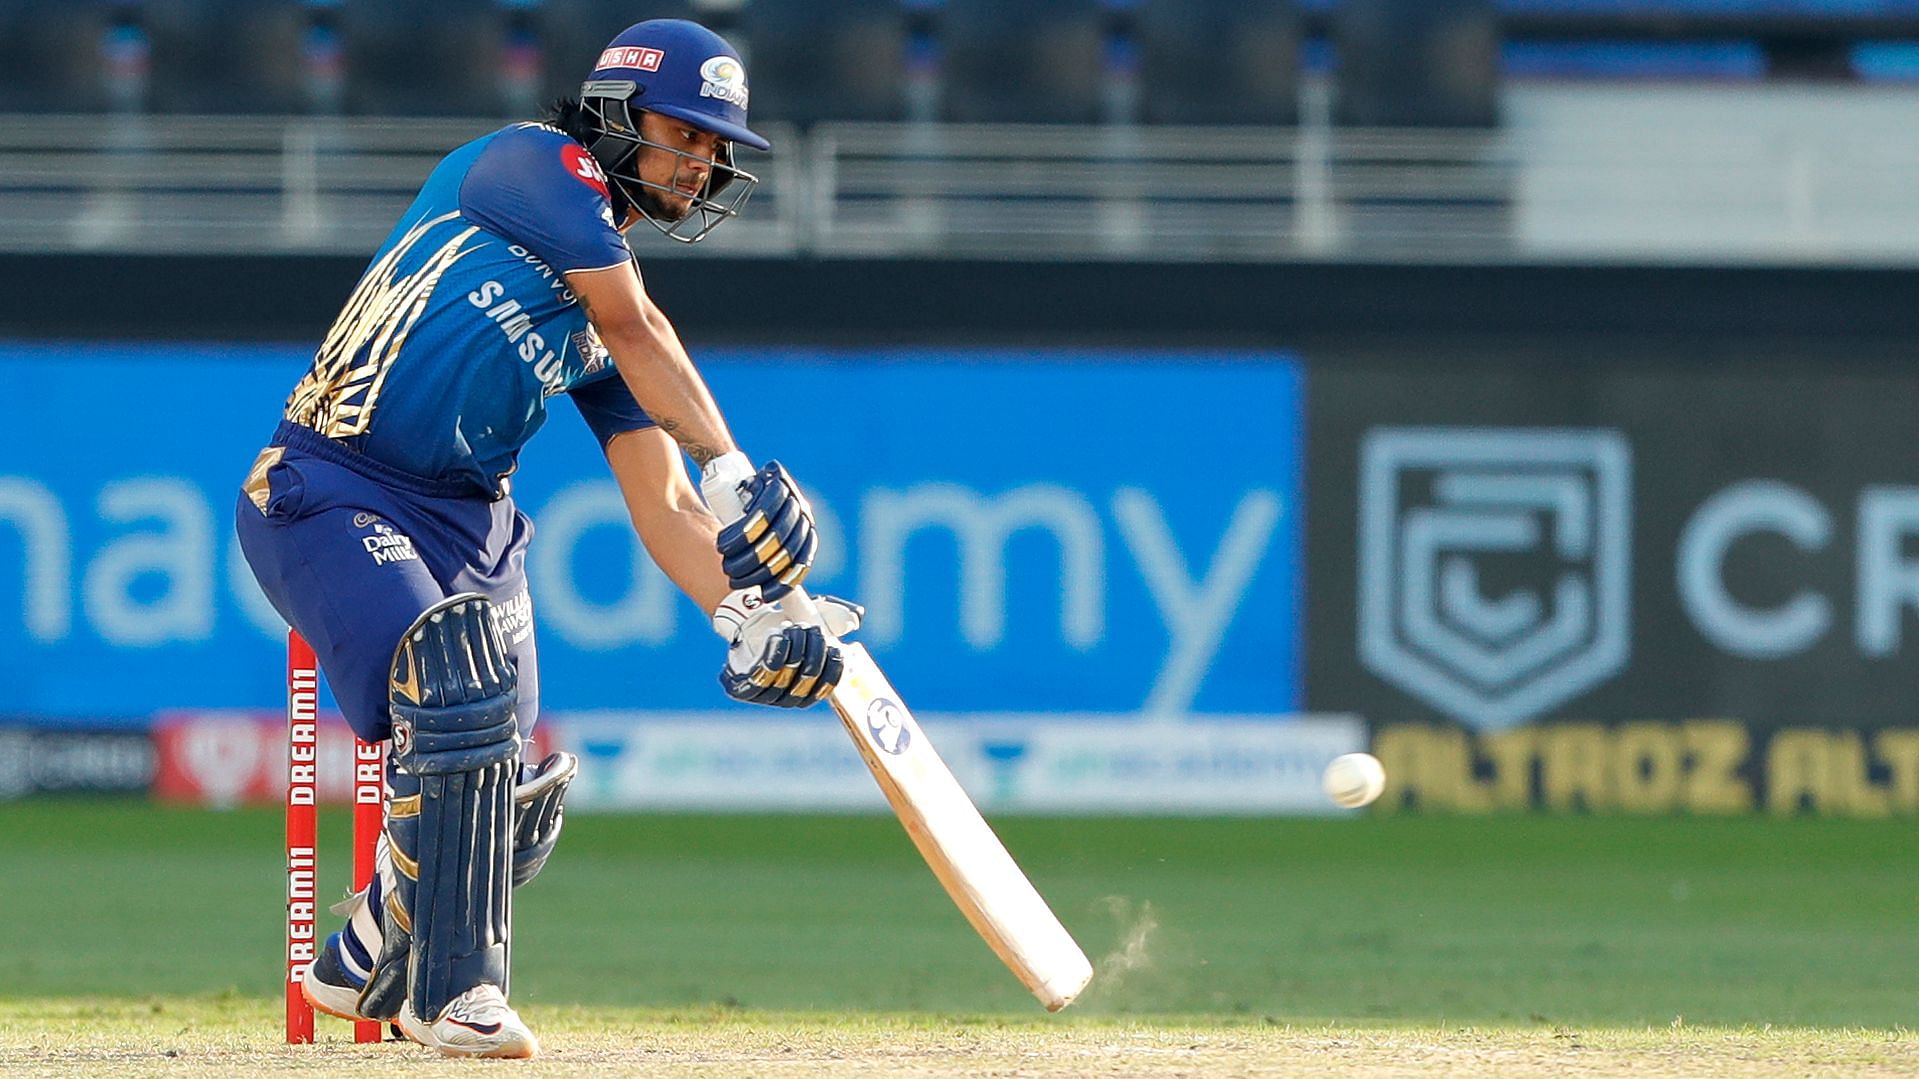 Ishan Kishan powers a drive through the off side during his match-winning knock against Delhi Capitals.